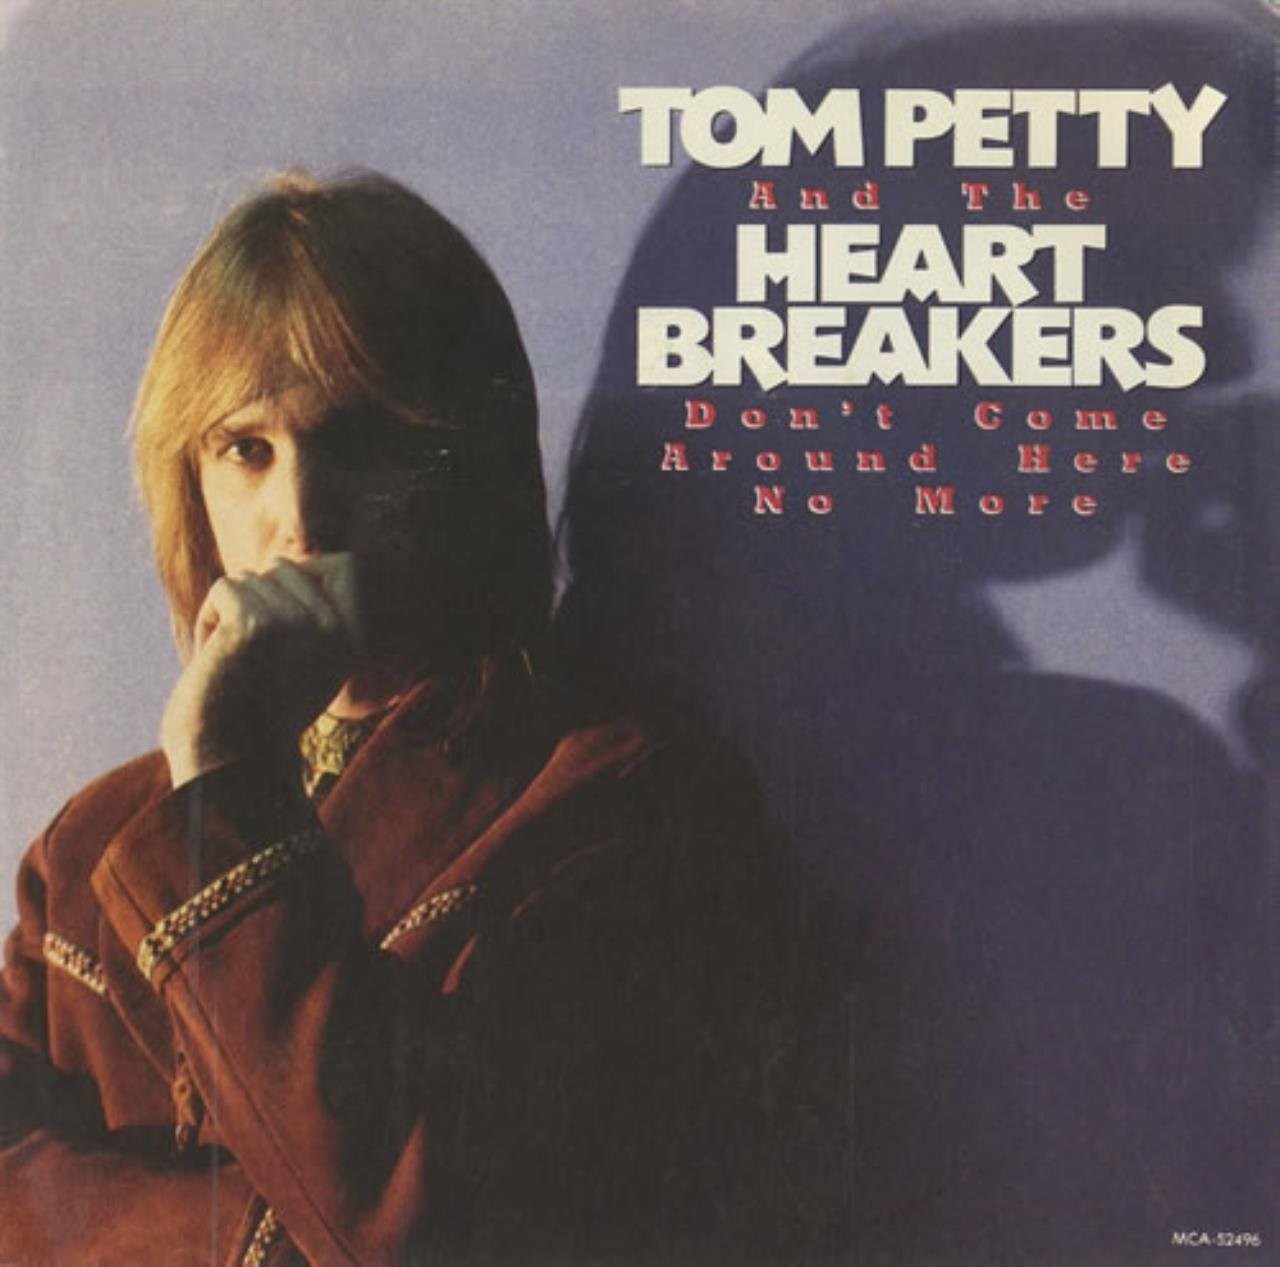 tom petty torrent discography beatles